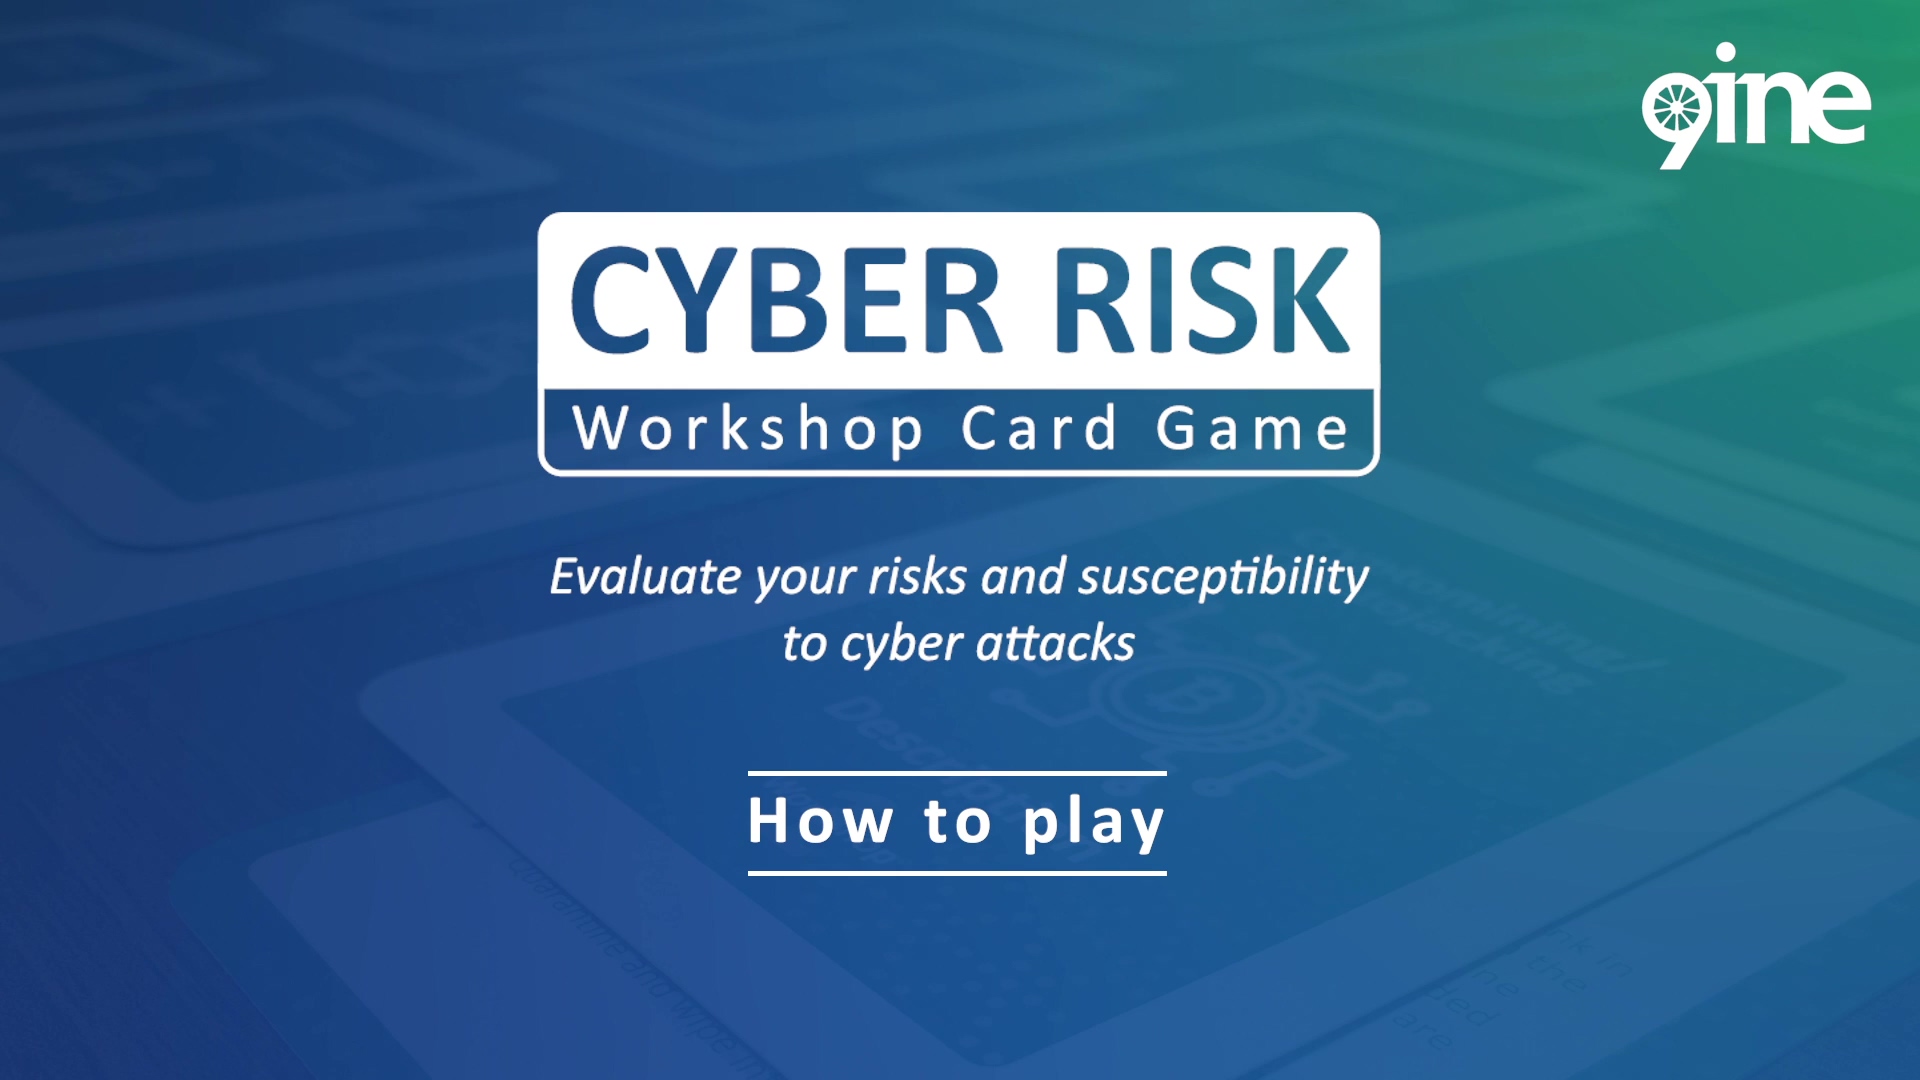 9ine_Cyber Risk_Workshop Card Game_How to Play_v0.2